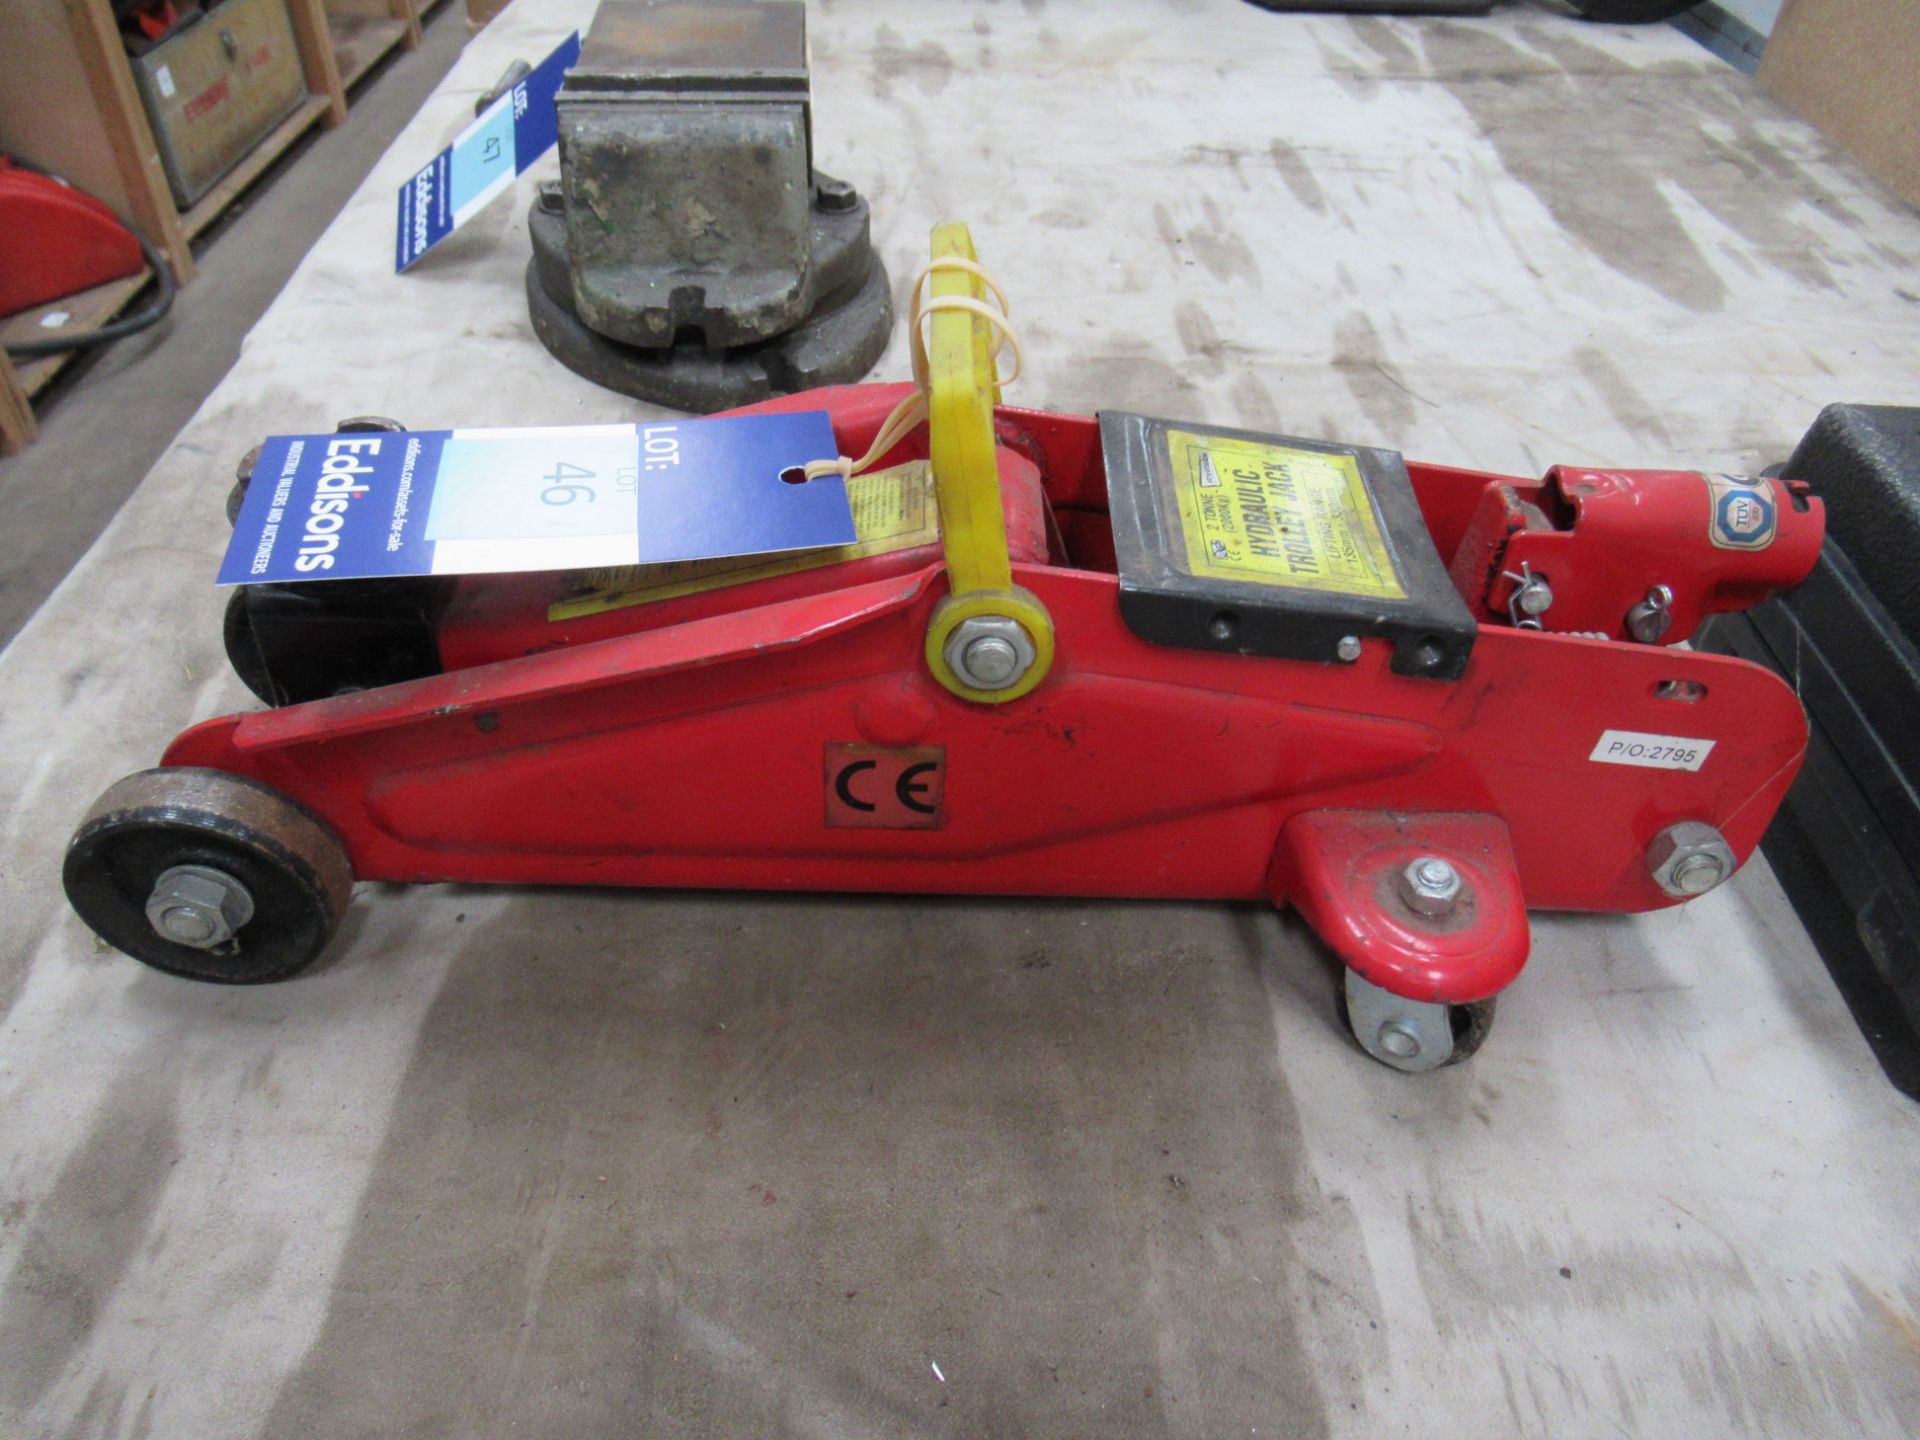 Hilka 5tonne Hydraulic Bottle Jack with a Streetwise 2tonne Hydraulic Jack (incomplete) - Image 3 of 5